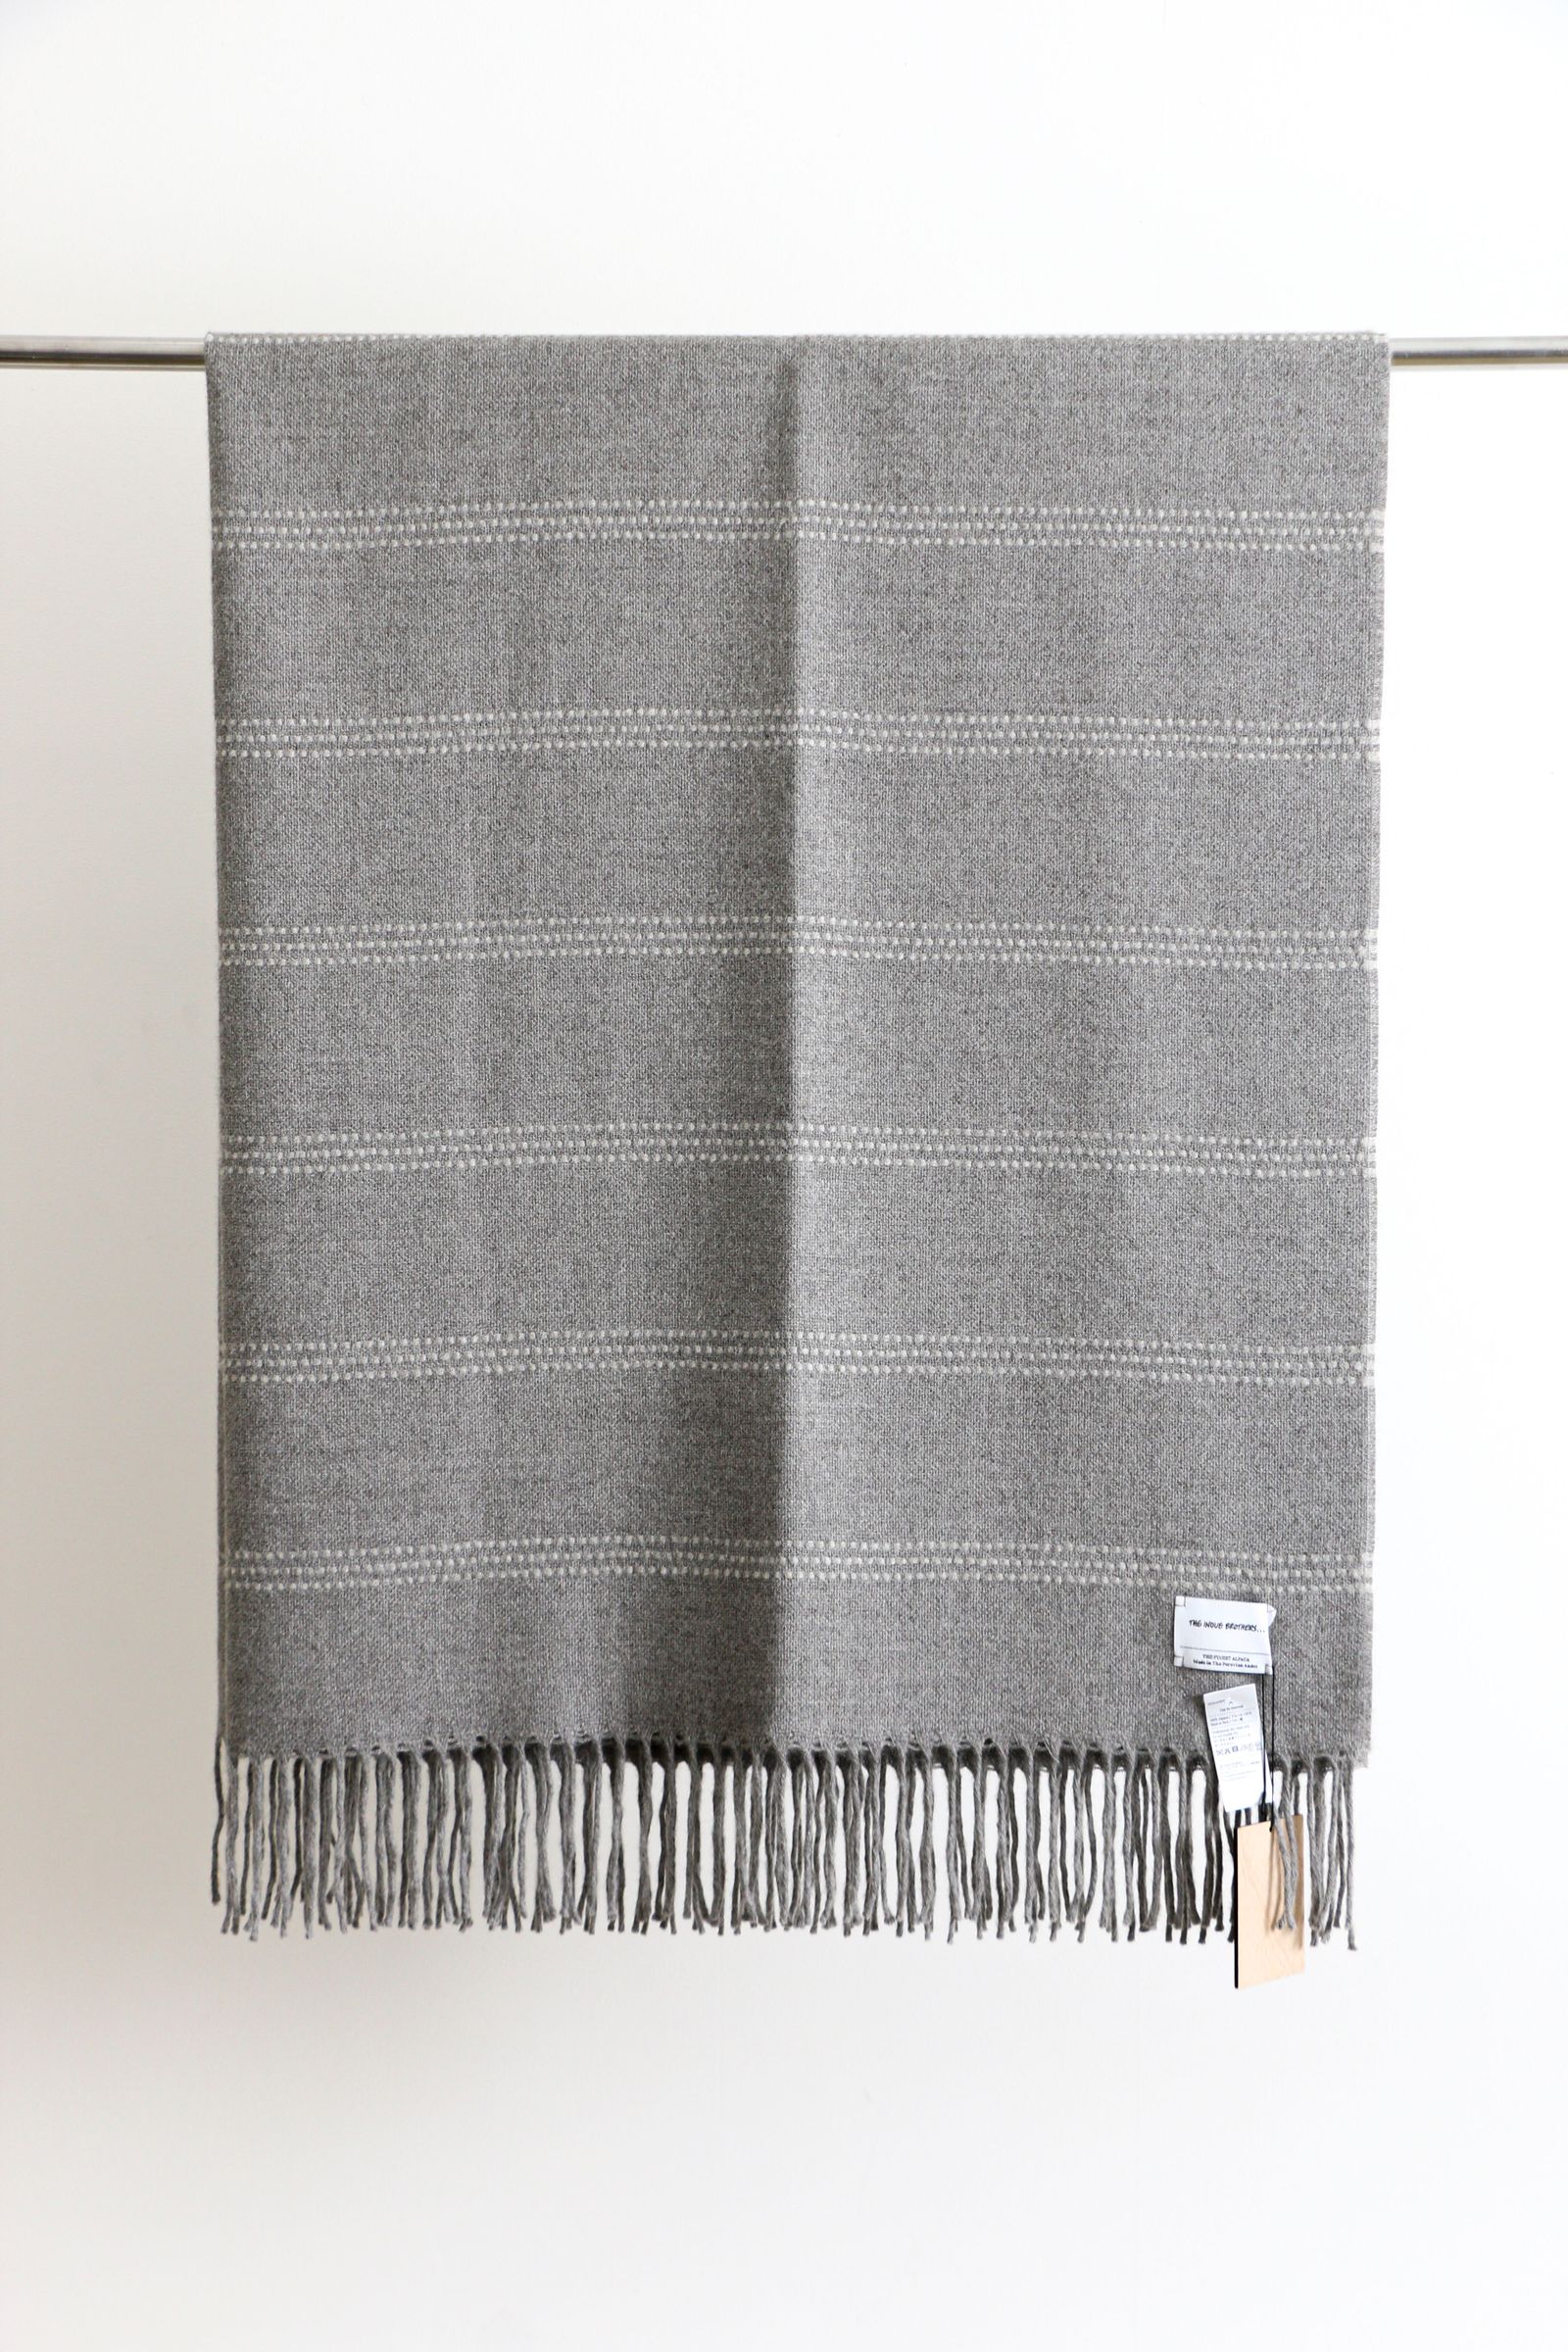 THE INOUE BROTHERS - THE INOUE BROTHERS Blanket Stripe Beige ...